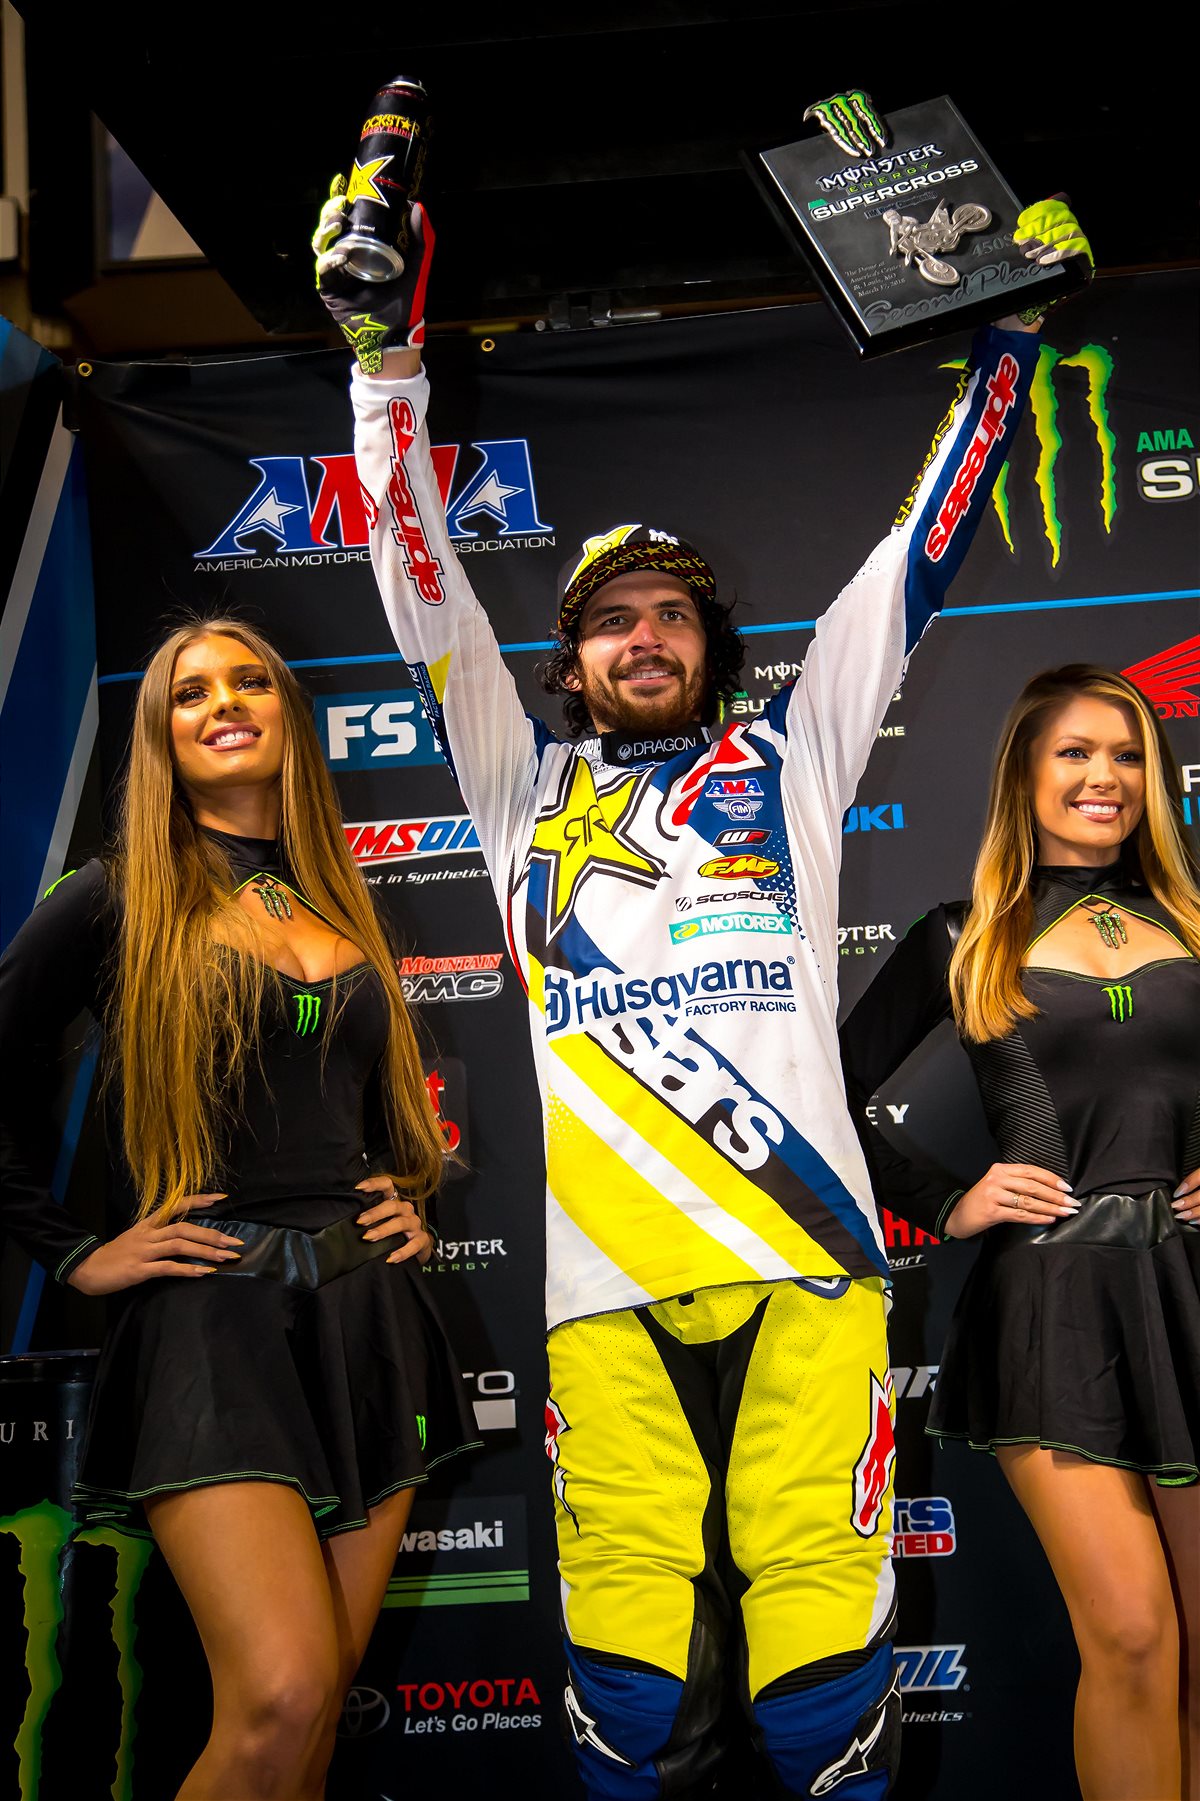 Jason Anderson finished 2nd and extended his points lead in the 450 class. (Photo: Simon Cudby)